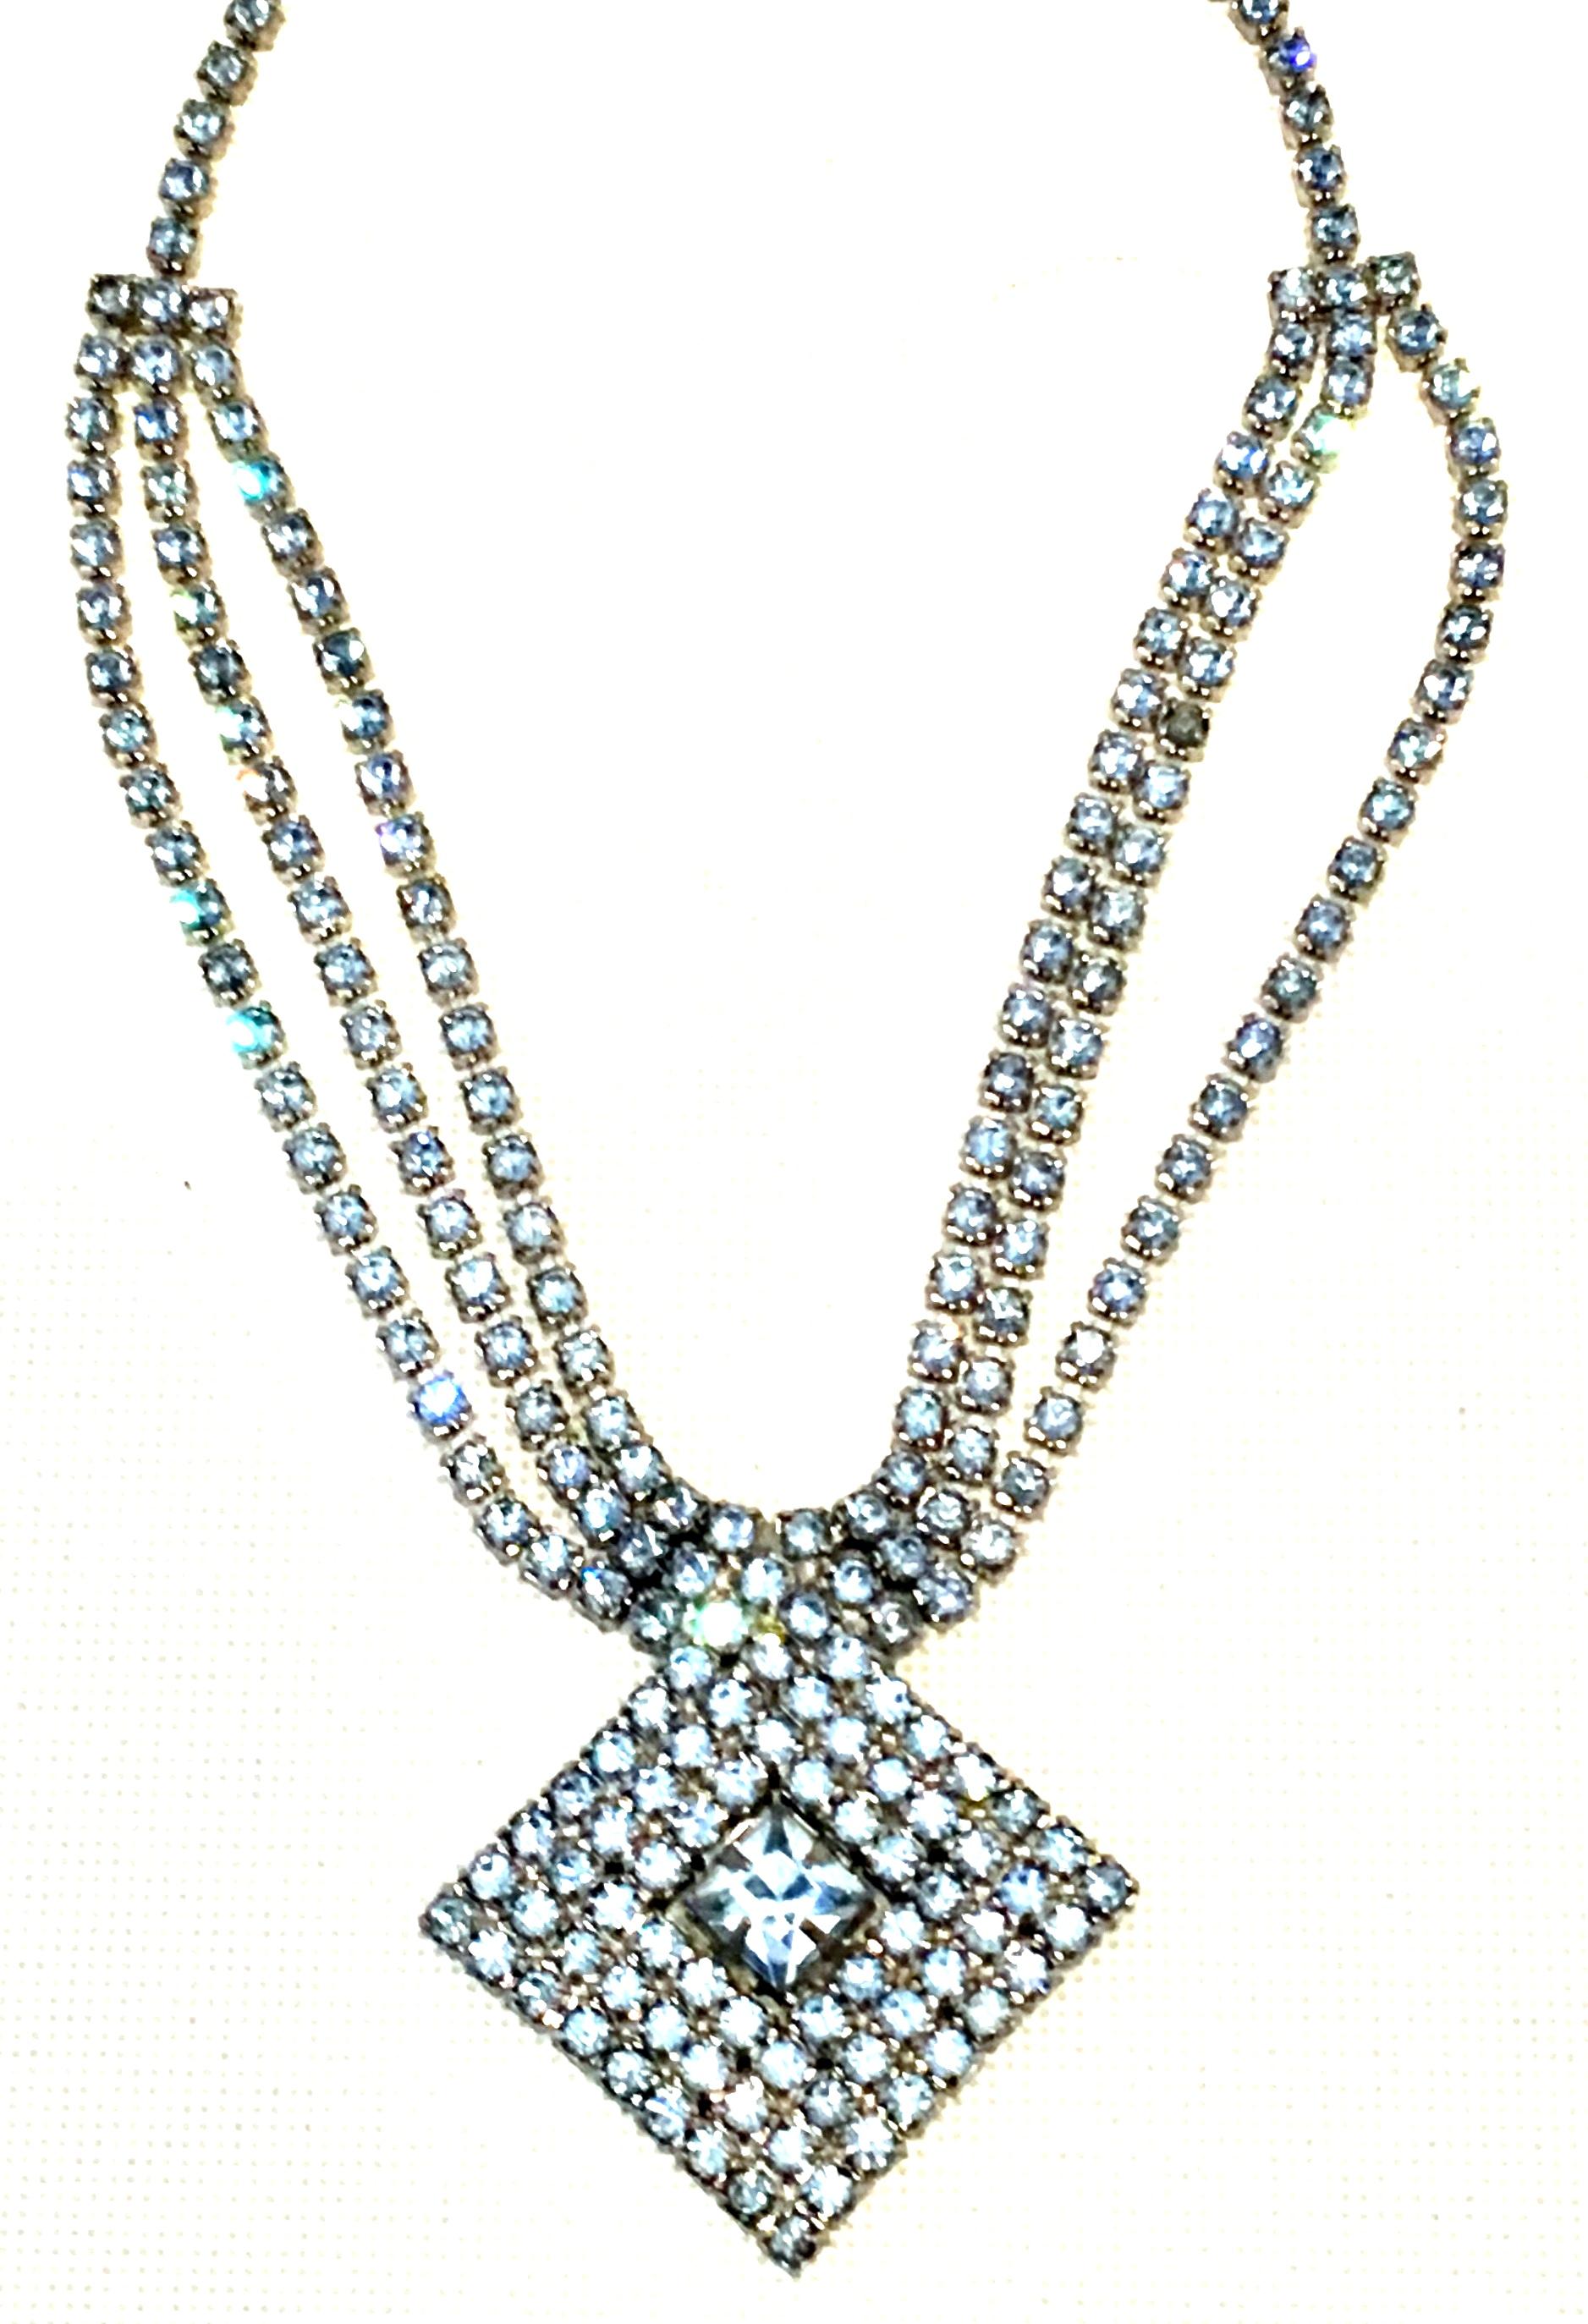 60'S Silver & Swarovski Crystal Triple Row Pendant Choker Necklace In Good Condition For Sale In West Palm Beach, FL